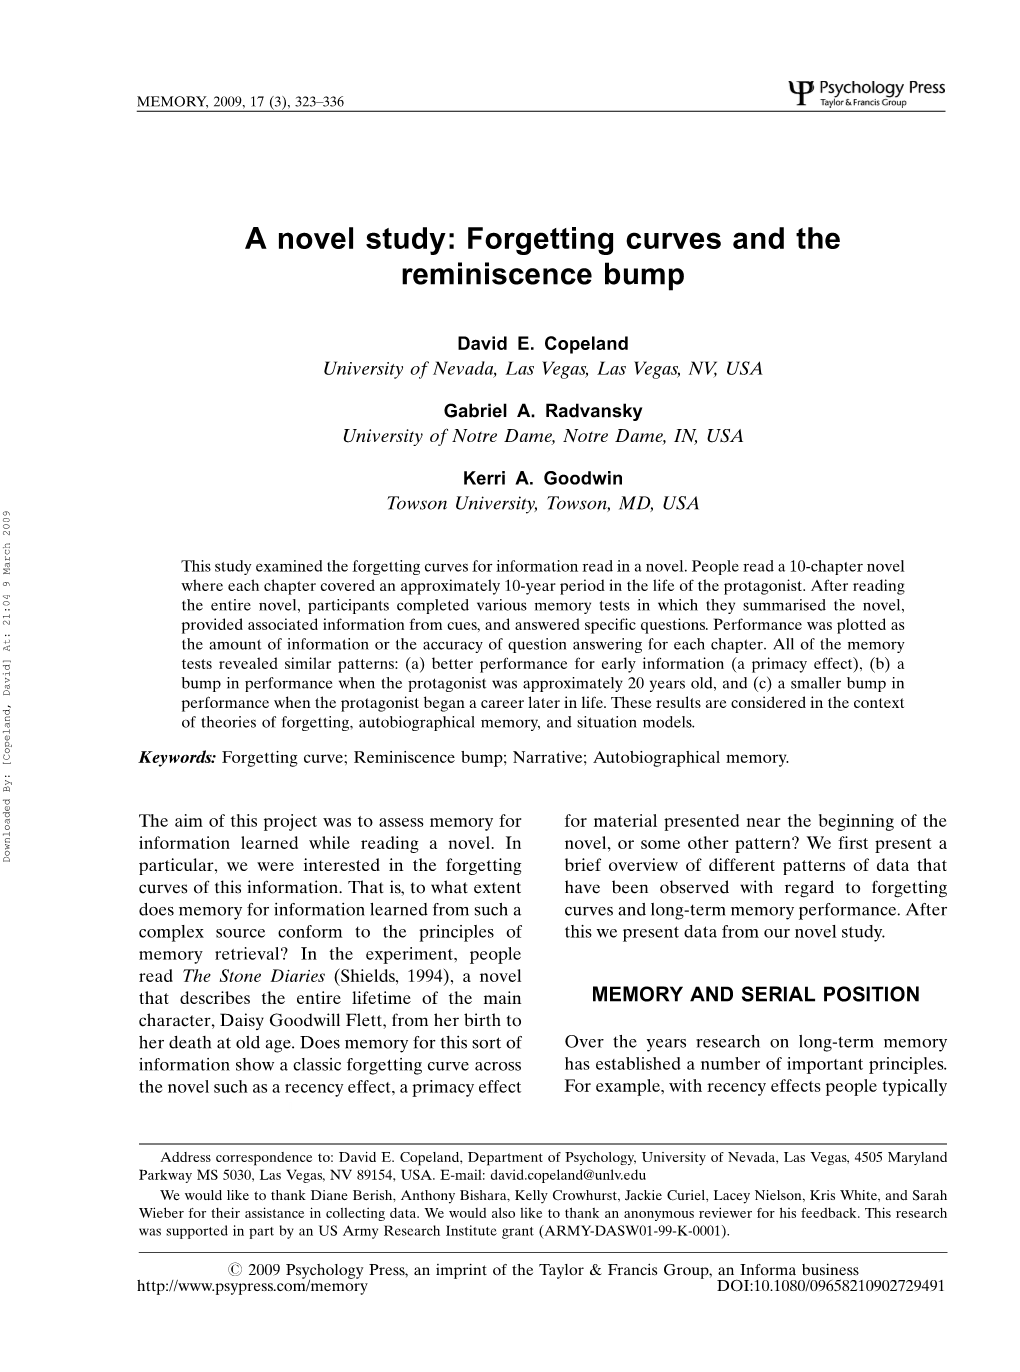 A Novel Study: Forgetting Curves and the Reminiscence Bump